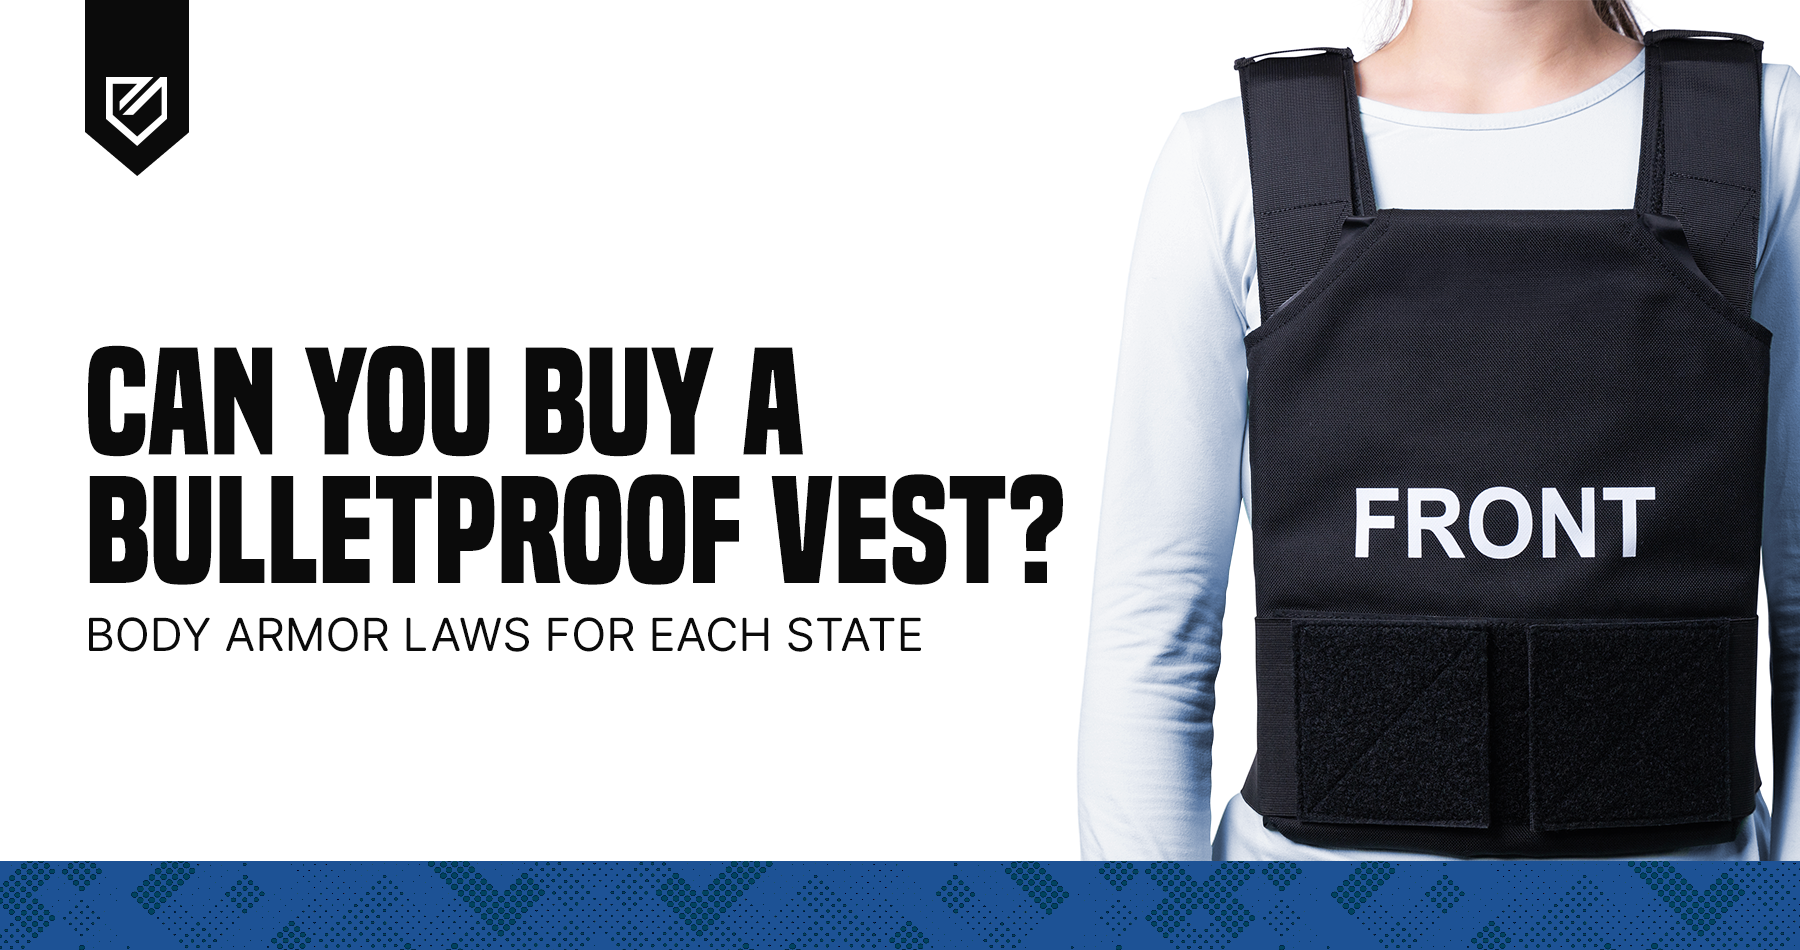 Body Armor Laws for Each State